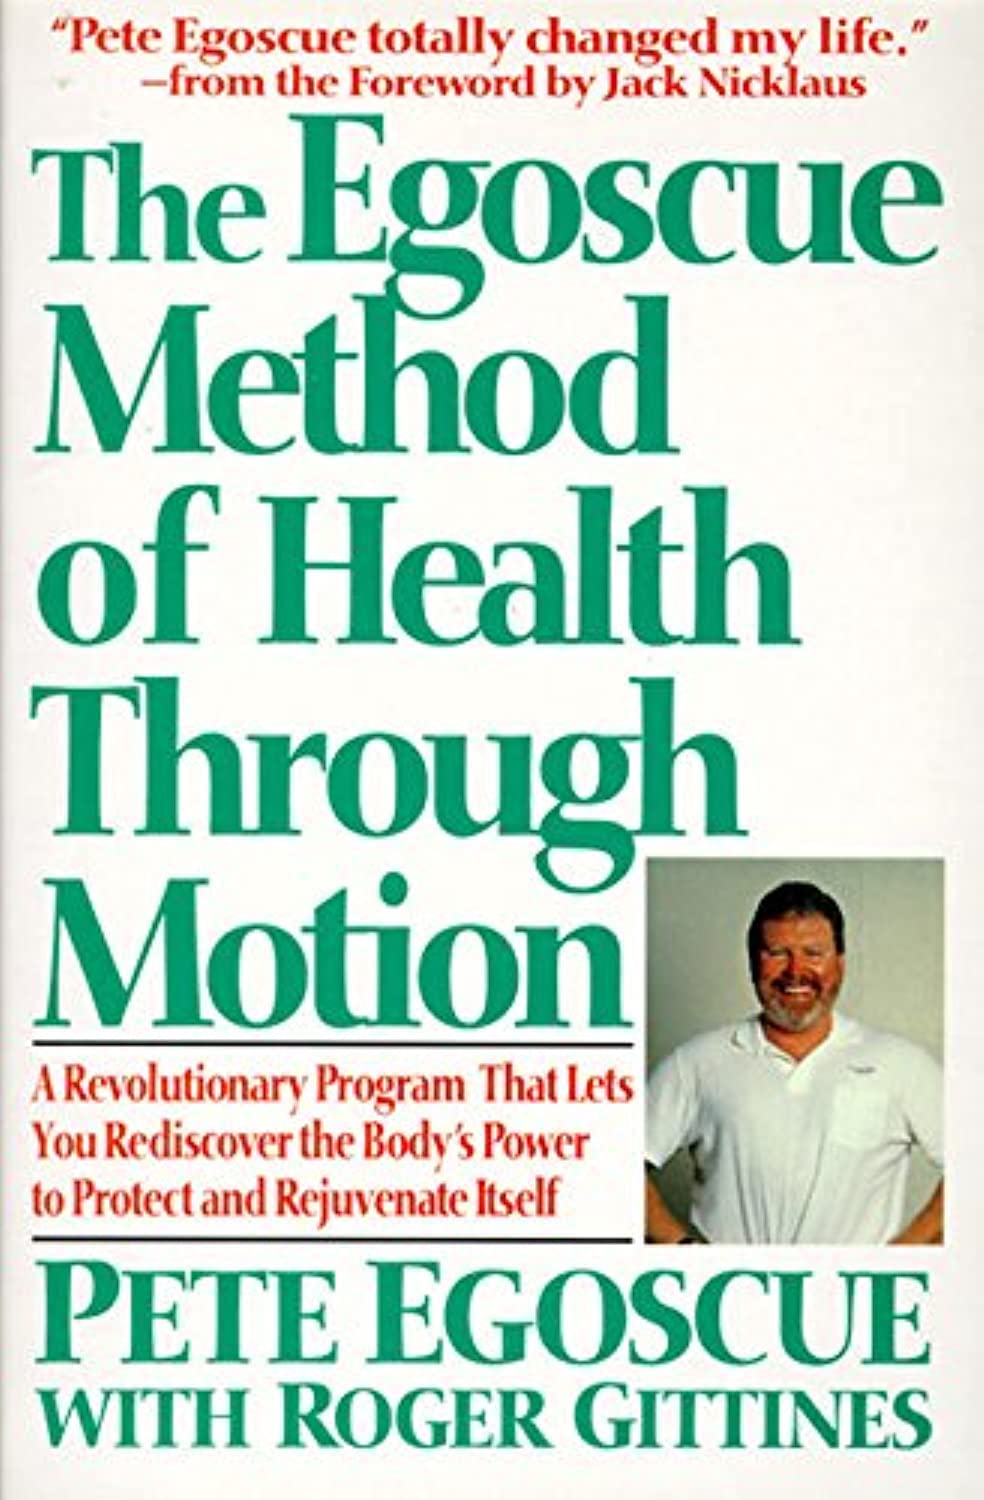 Featured Image for The Egoscue Method of Health Through Motion: Revolutionary Program That Lets You Rediscover the Body’s Power to Rejuvenate It